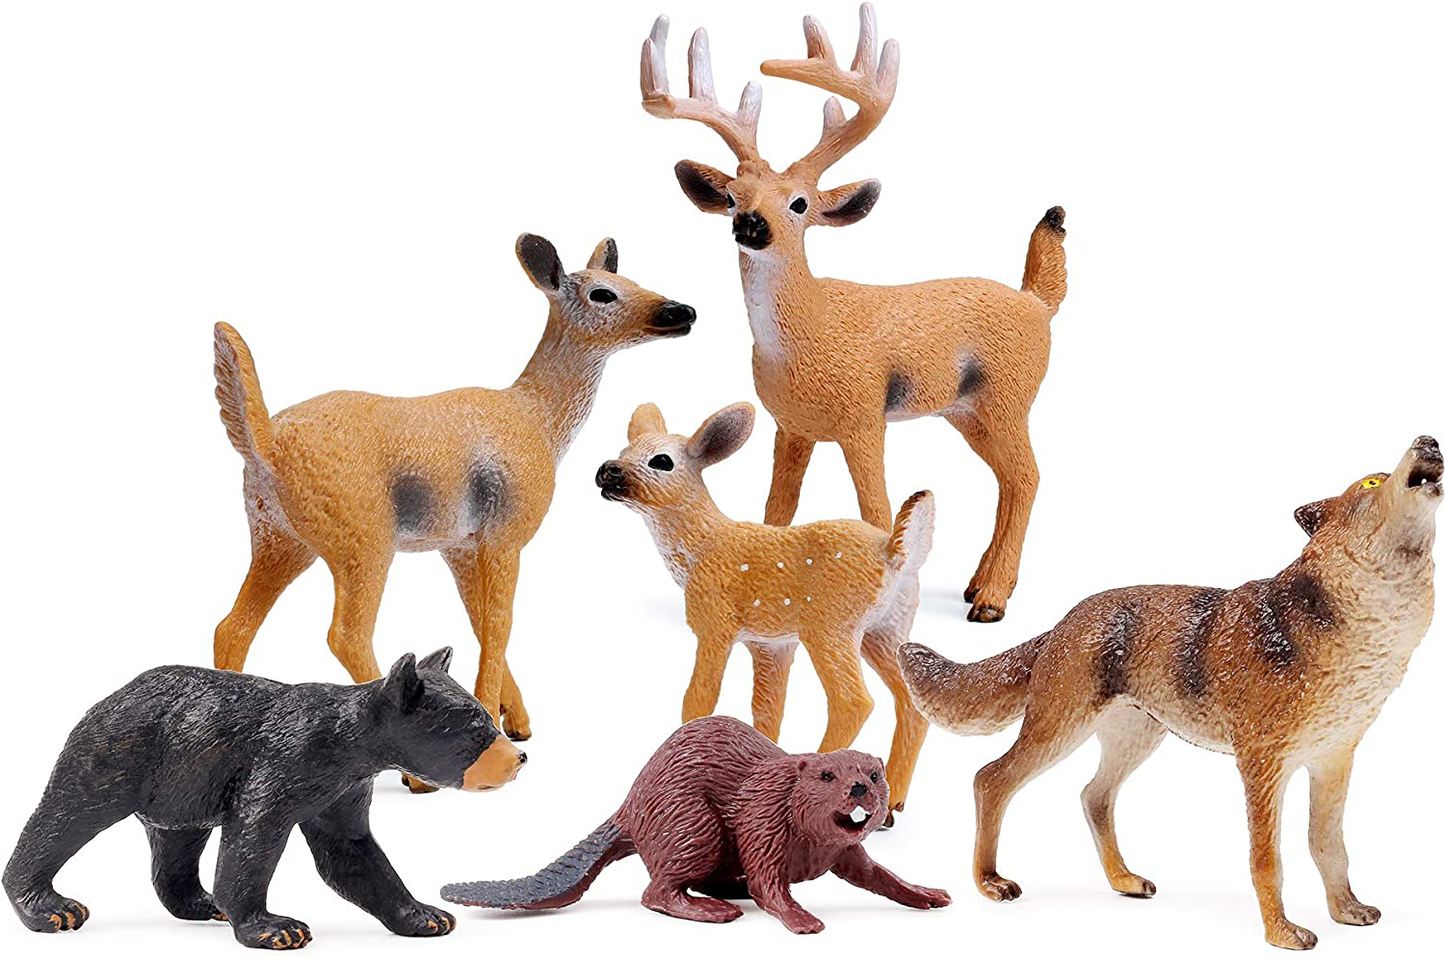 Forest Animals Figures, Woodland Creatures Figurines, Miniature Toys Cake Toppers (Deer Family, Fox, Rabbit, Squirrel)